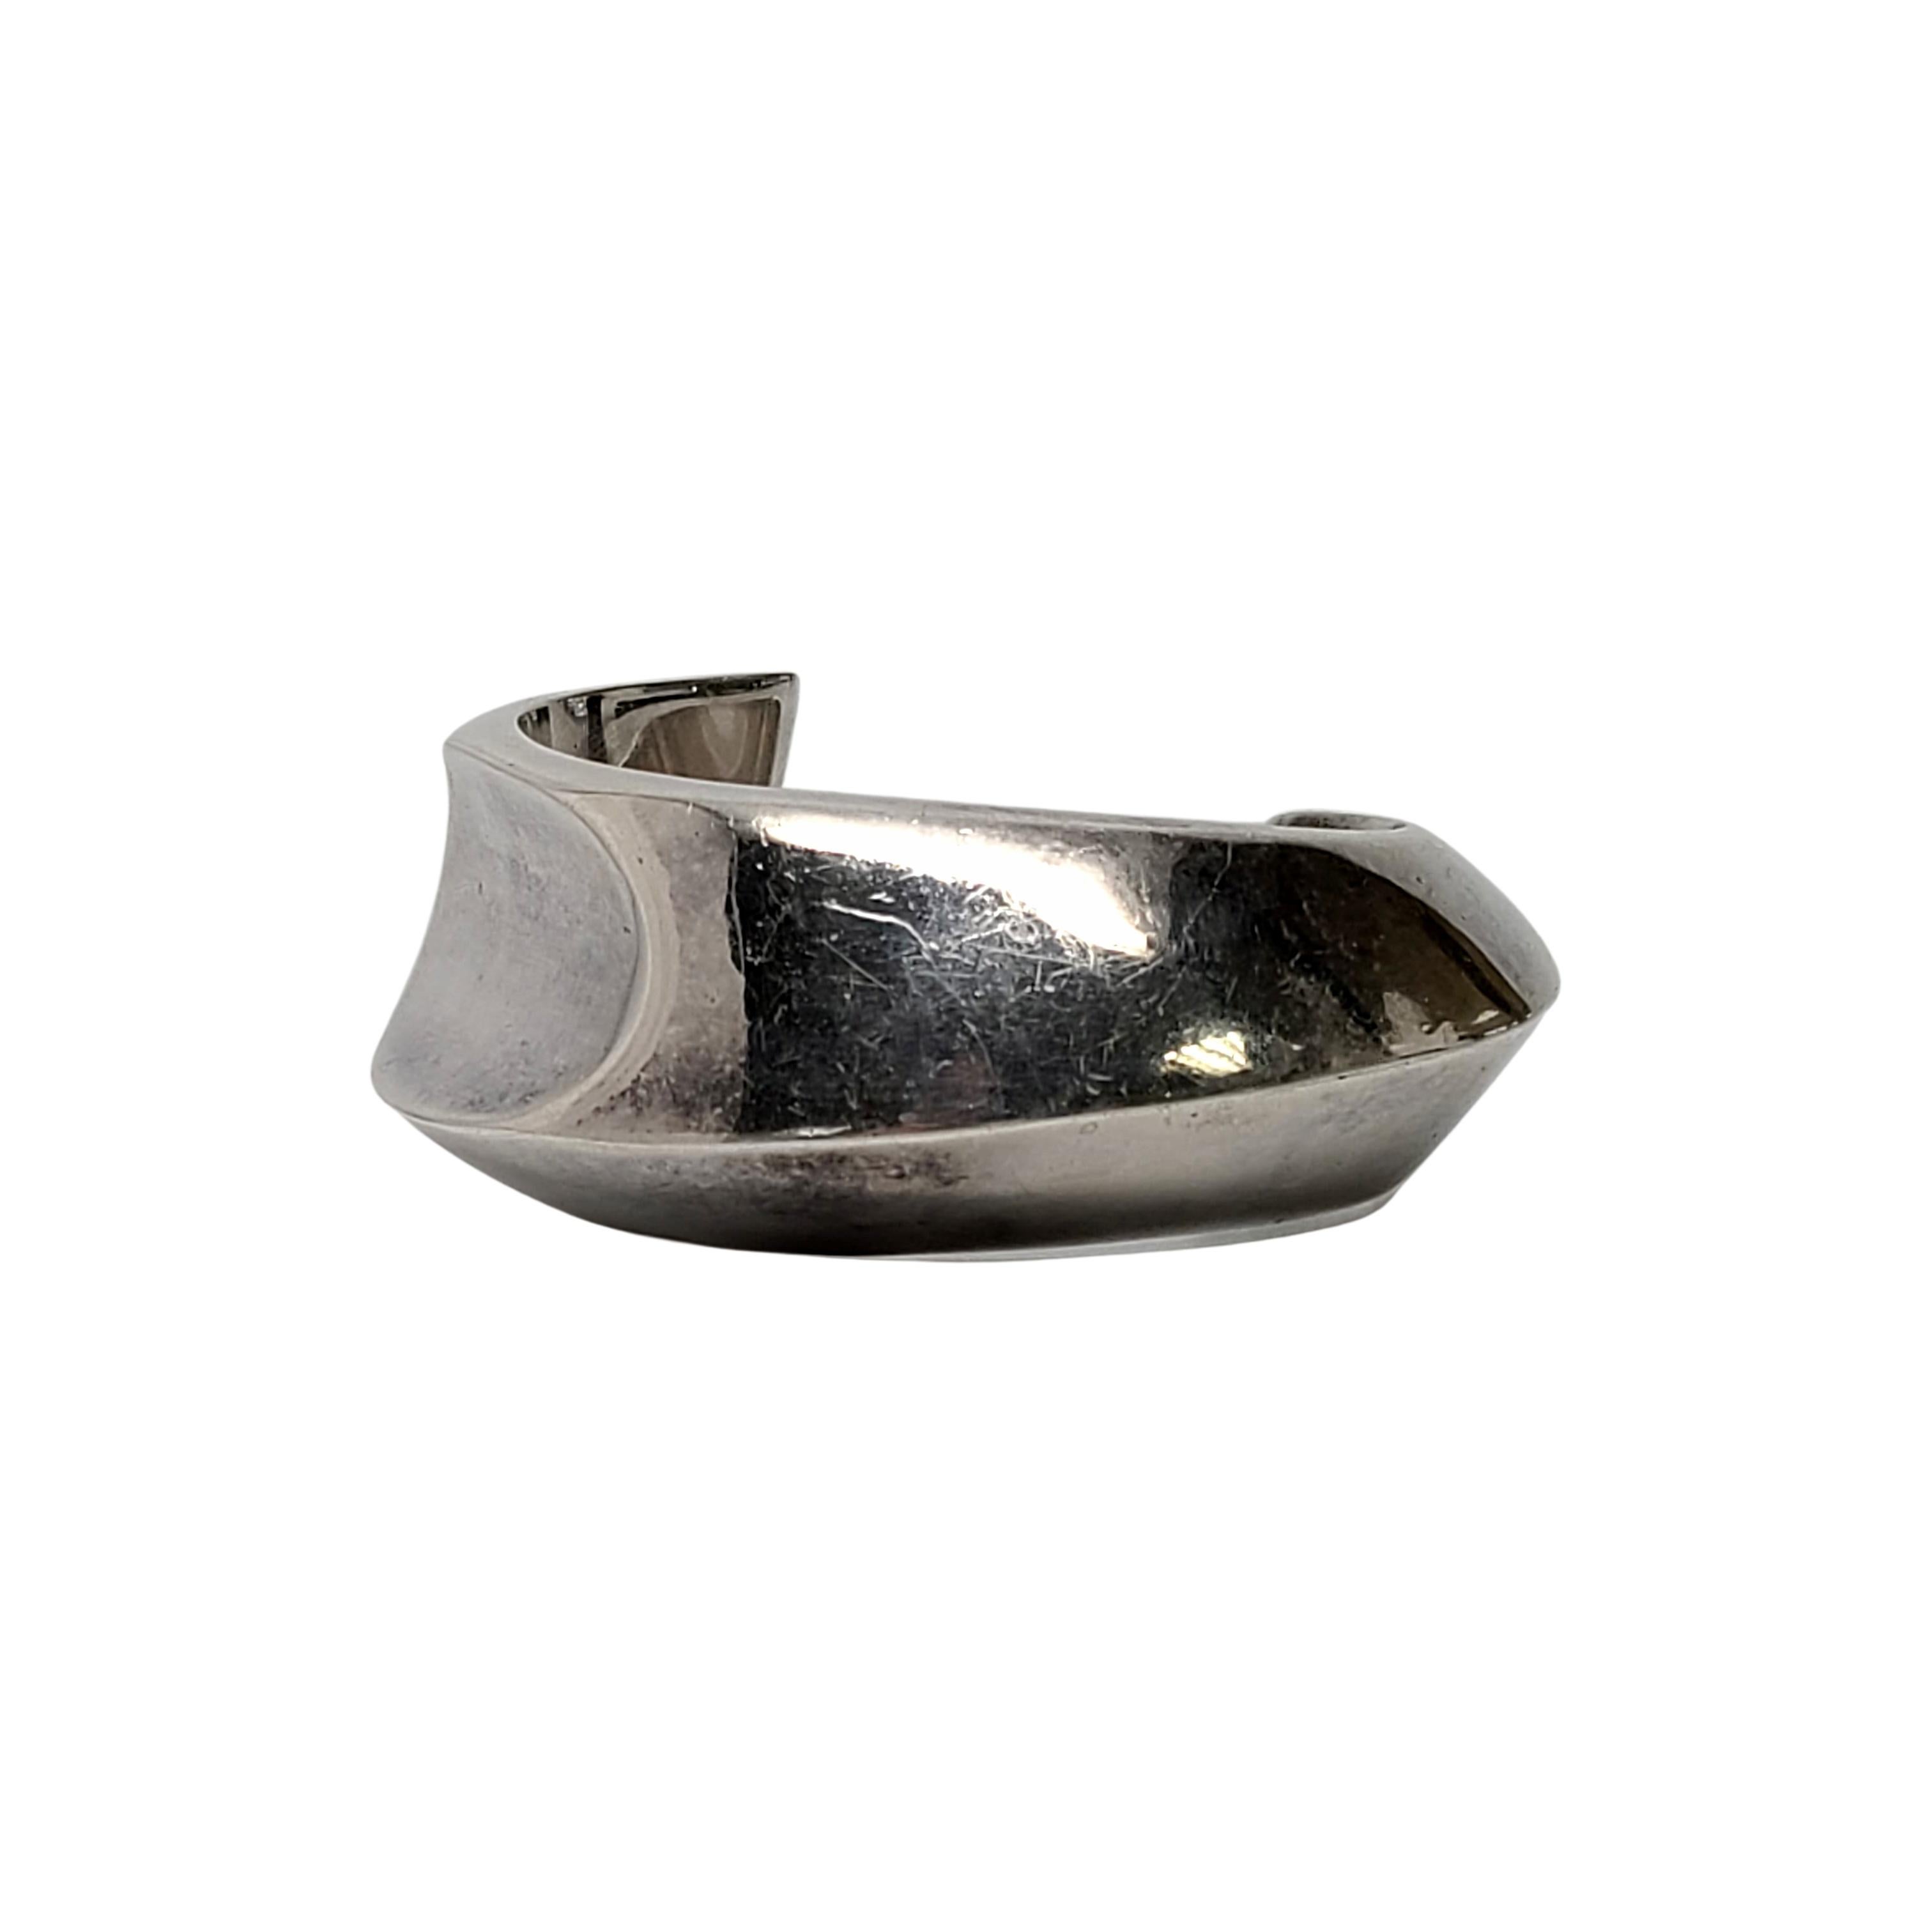 Thumbprint knife edge sterling silver cuff bracelet by Zina

Beautifully crafted wide cuff bracelet.

Measures approx 5